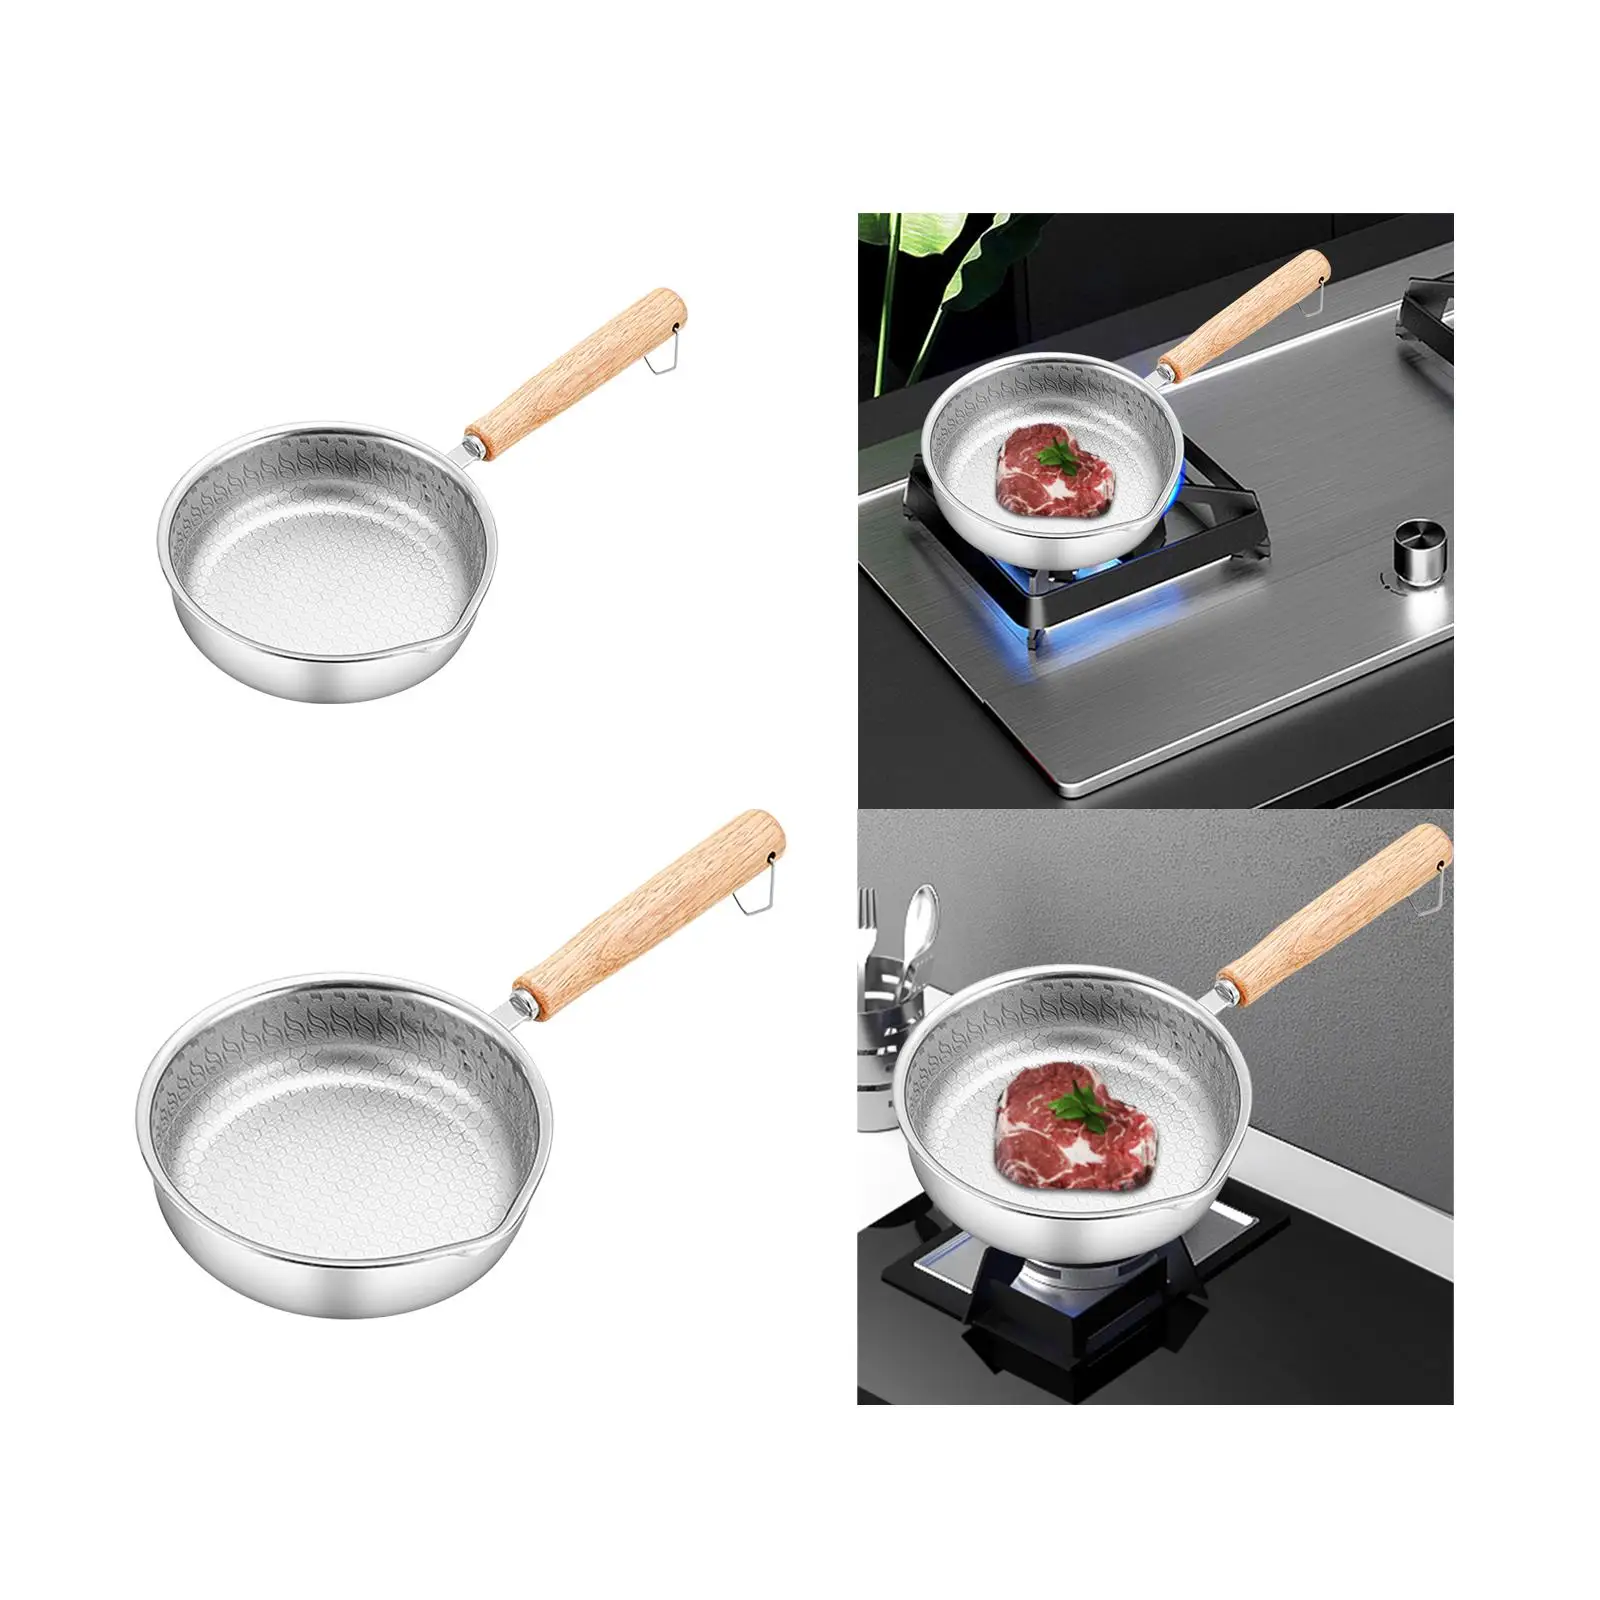 Mini Nonstick Egg Pan Nonstick Stainless Steel Skillet Omelet Pan for Restaurant Chef Camping Indoor and Outdoor Cooking Kitchen